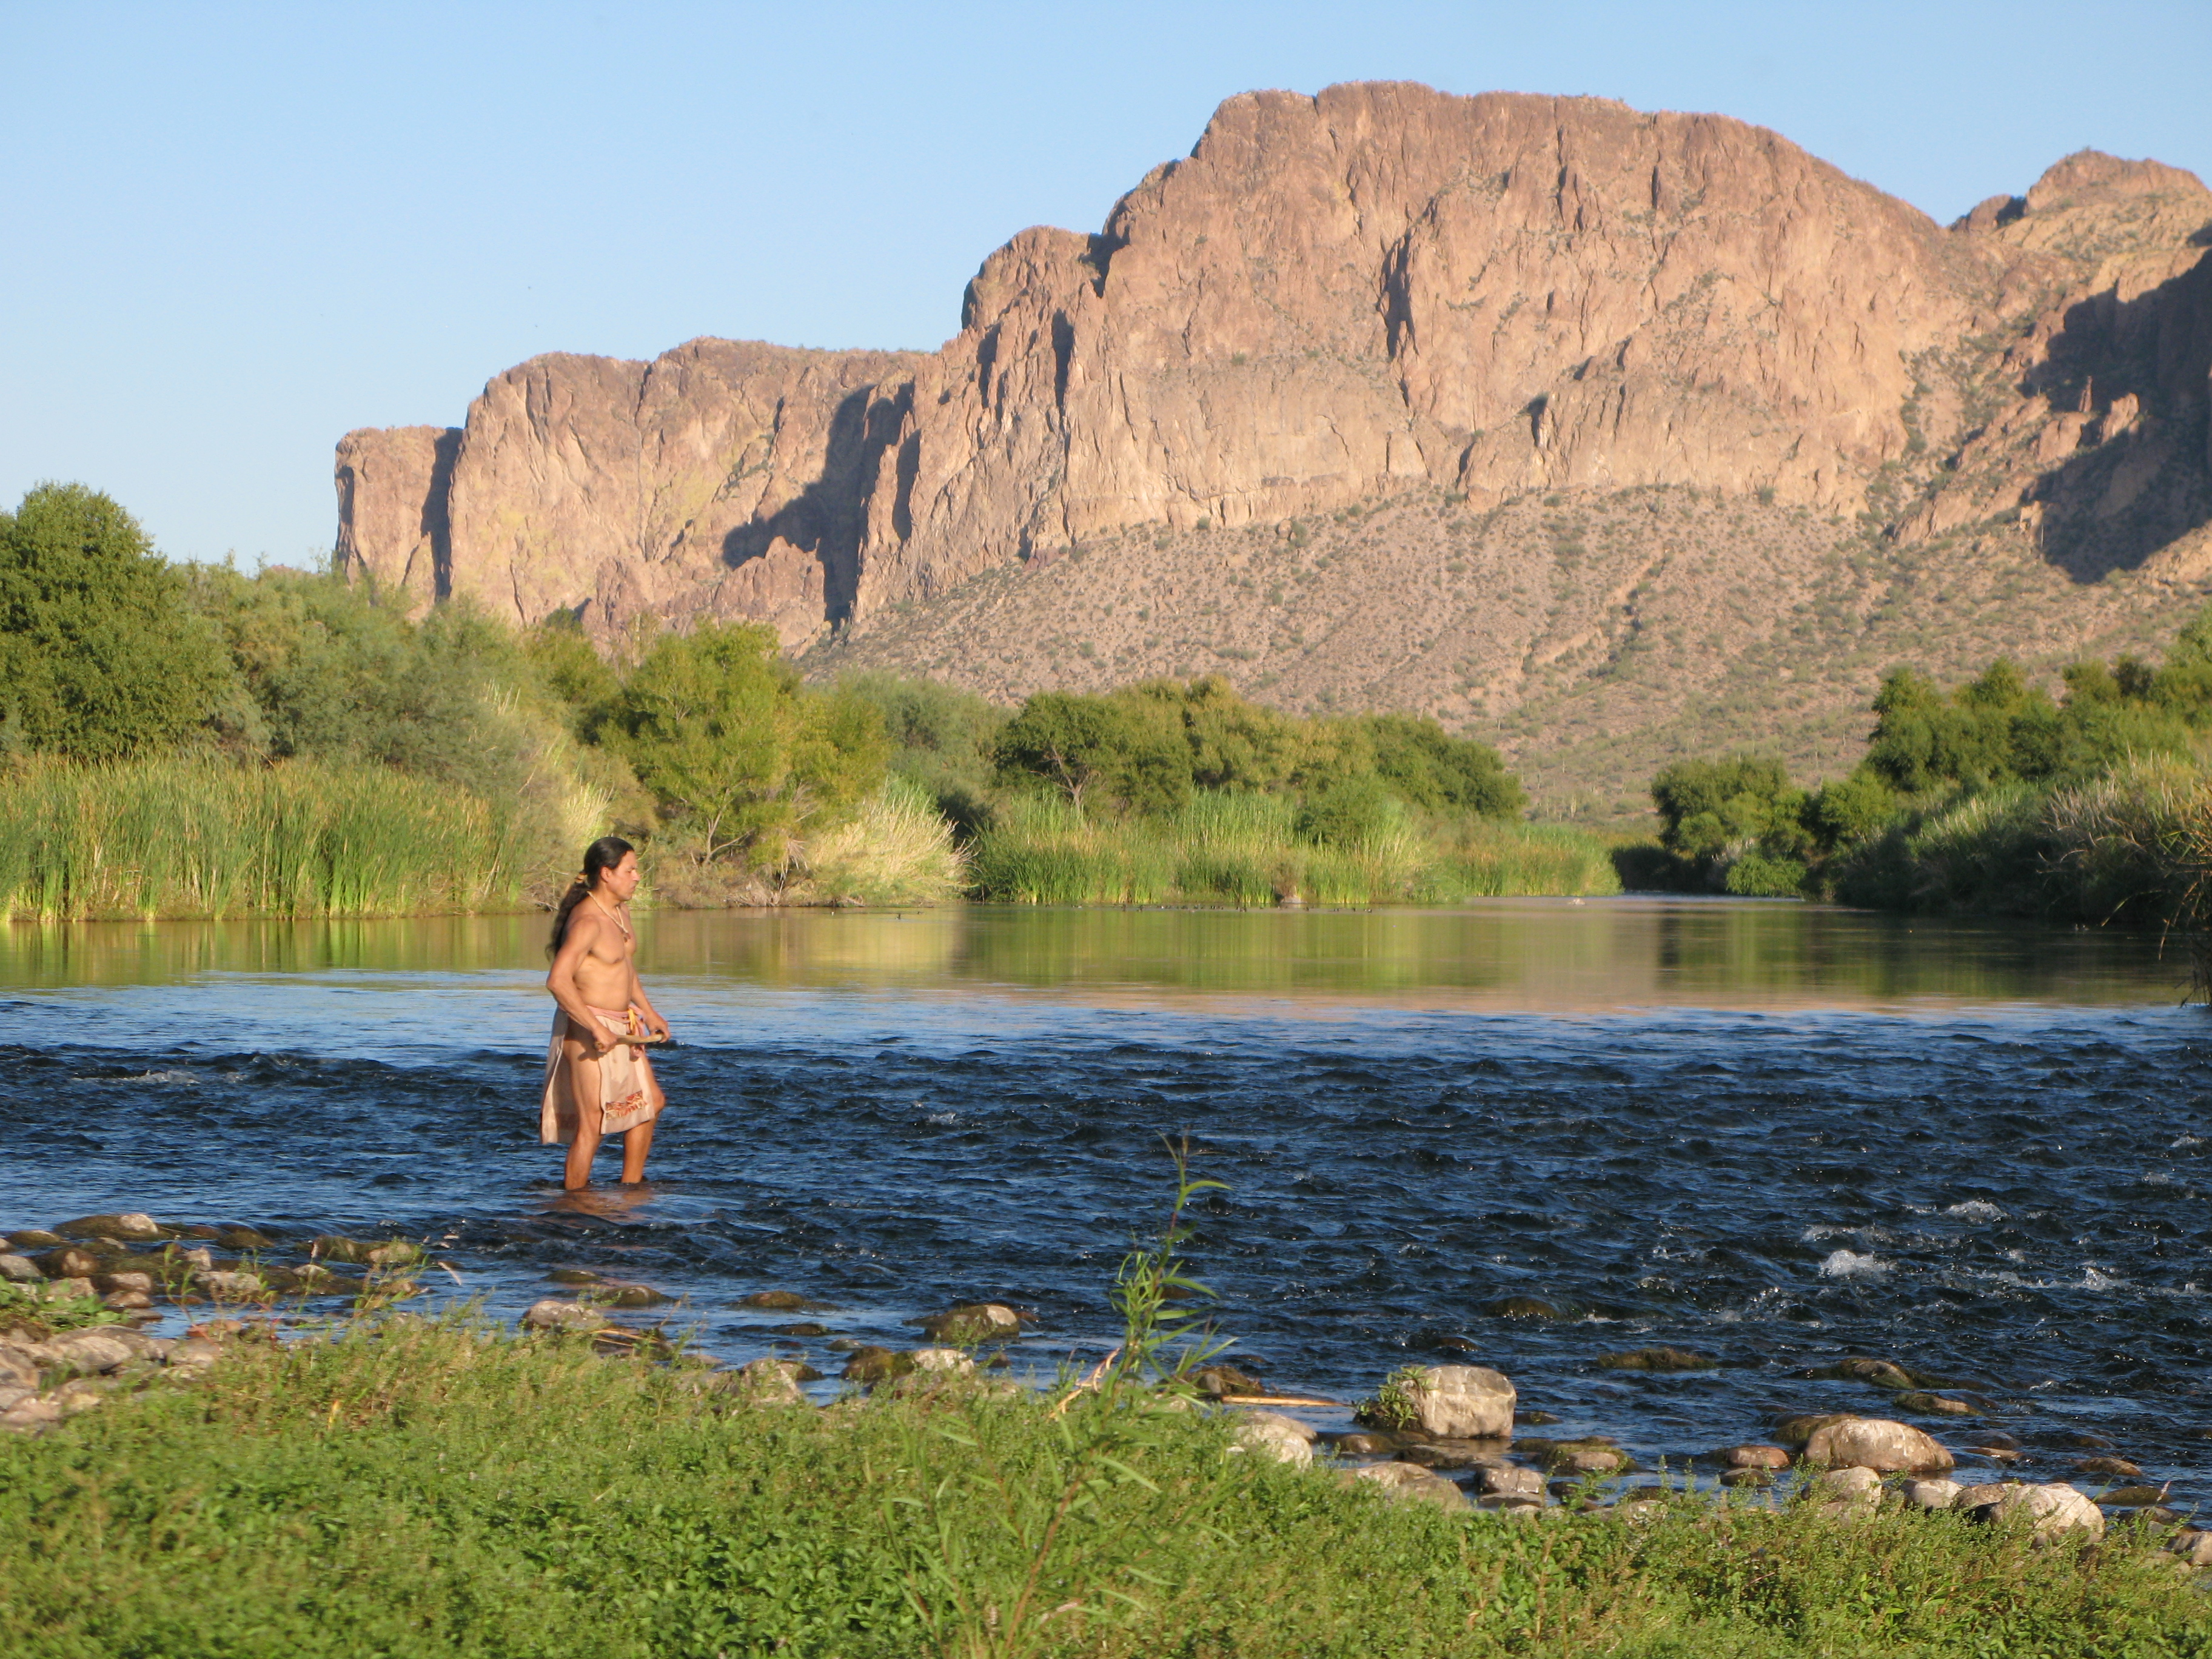 Actor Ruben Alvez Is Scouting The River For Resources And Places To